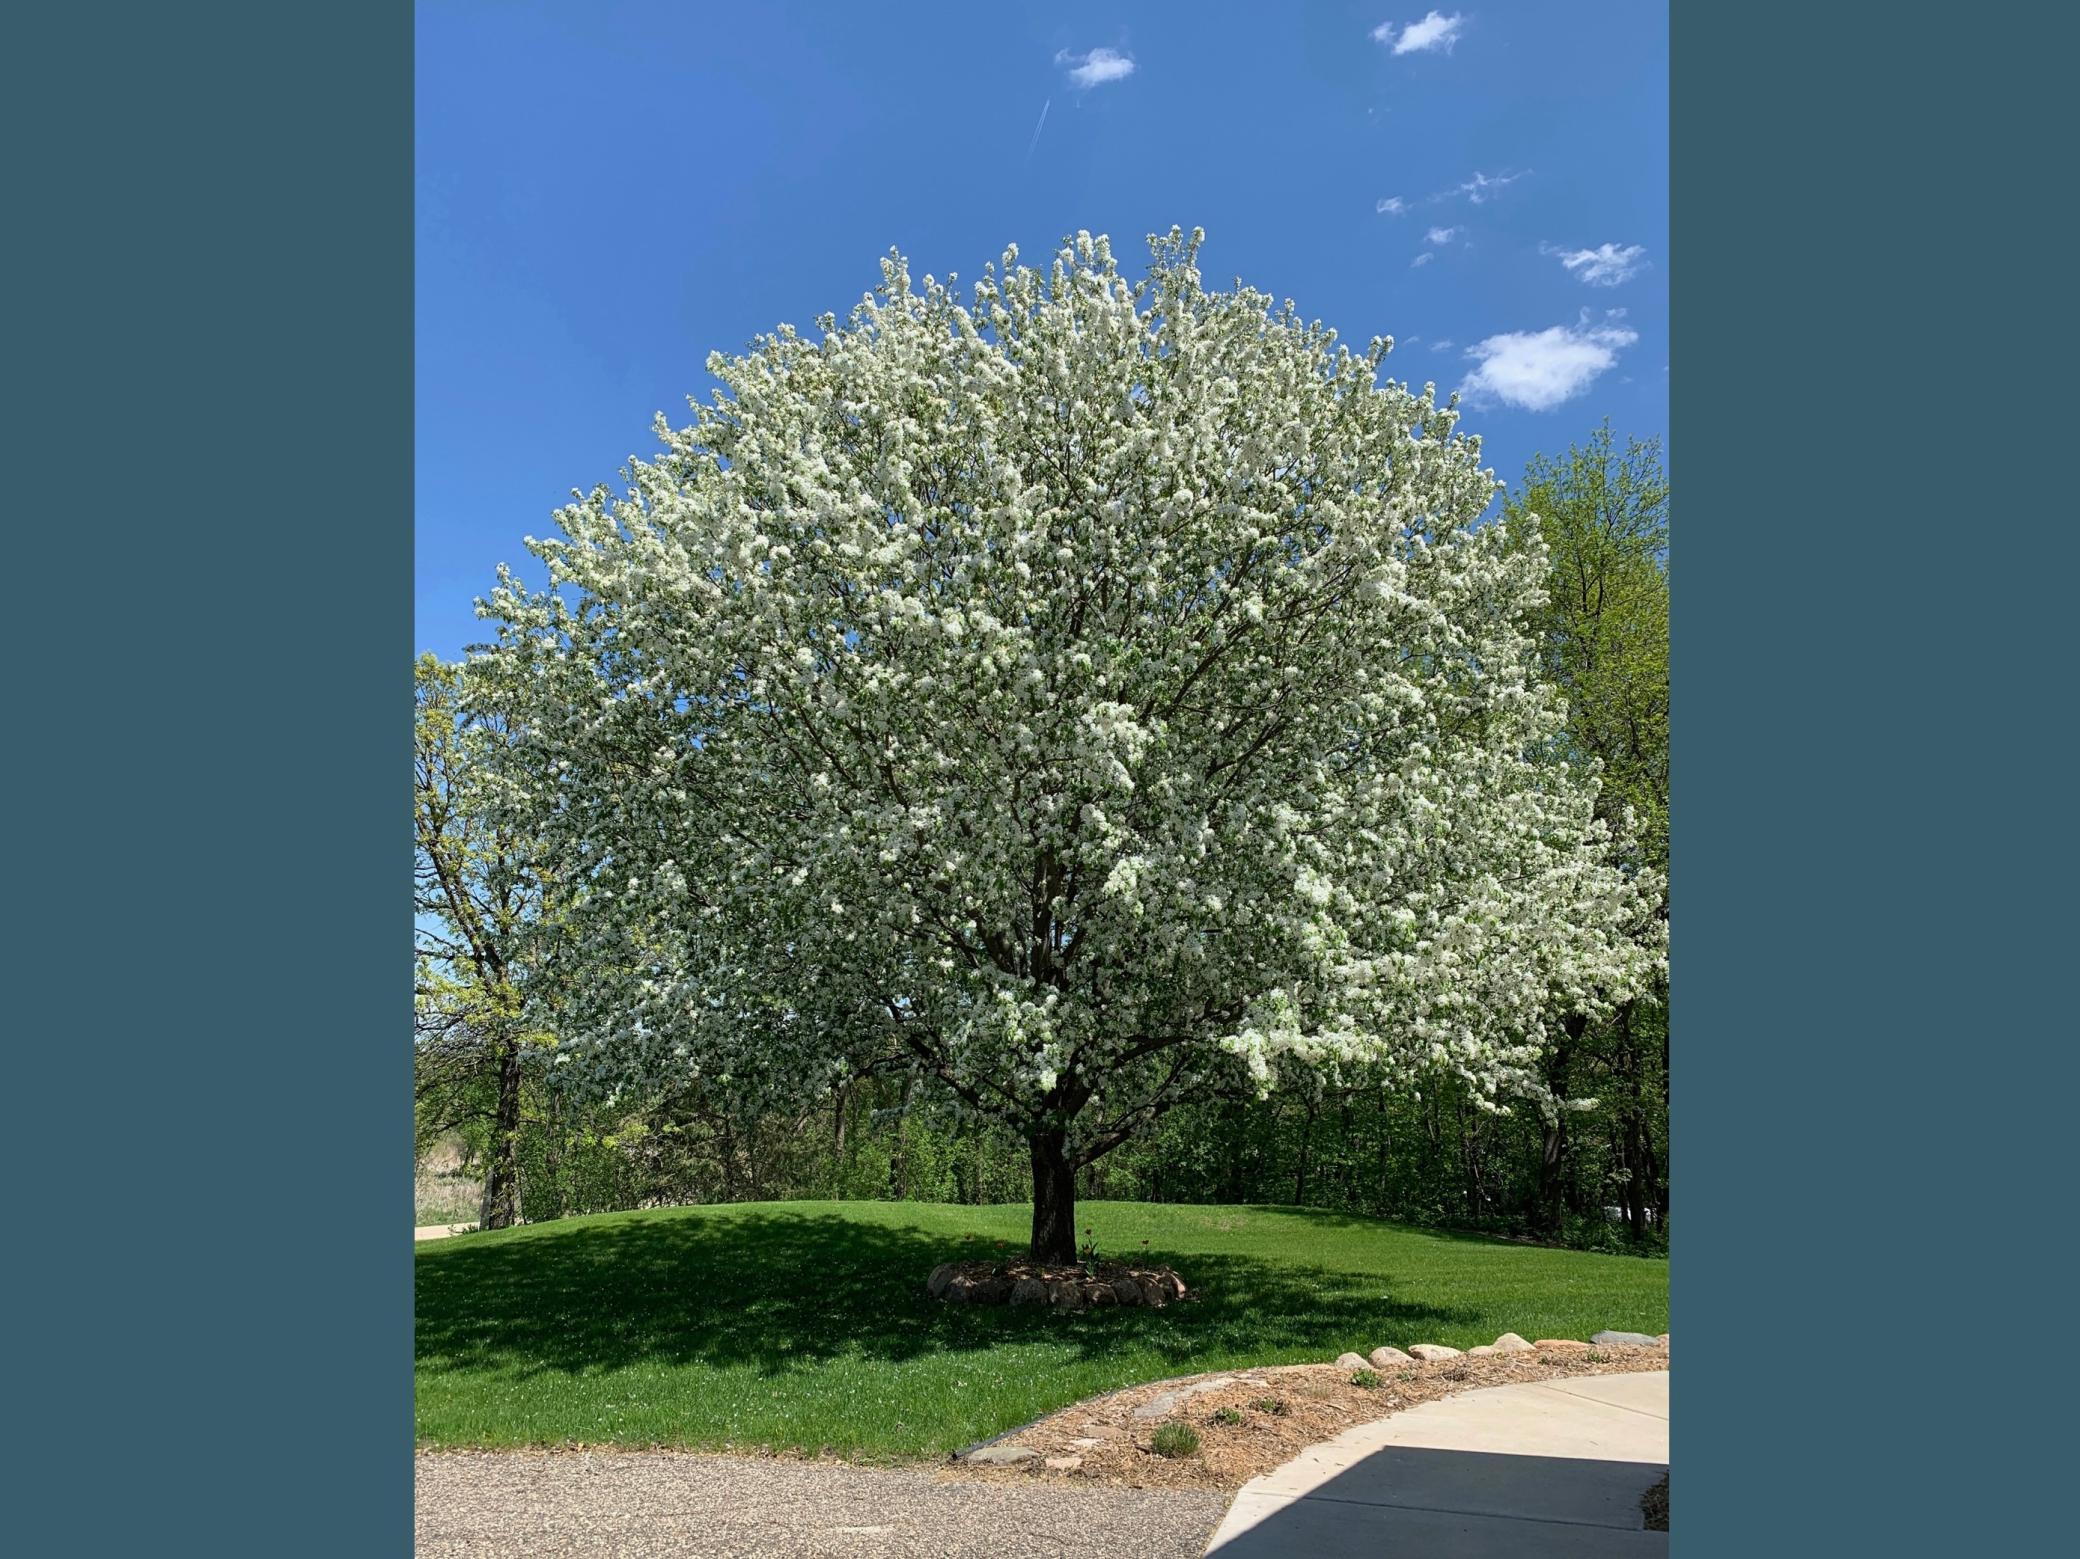 The decorative apple tree in the roadside yard offers all the beauty of an apple tree without the mess!